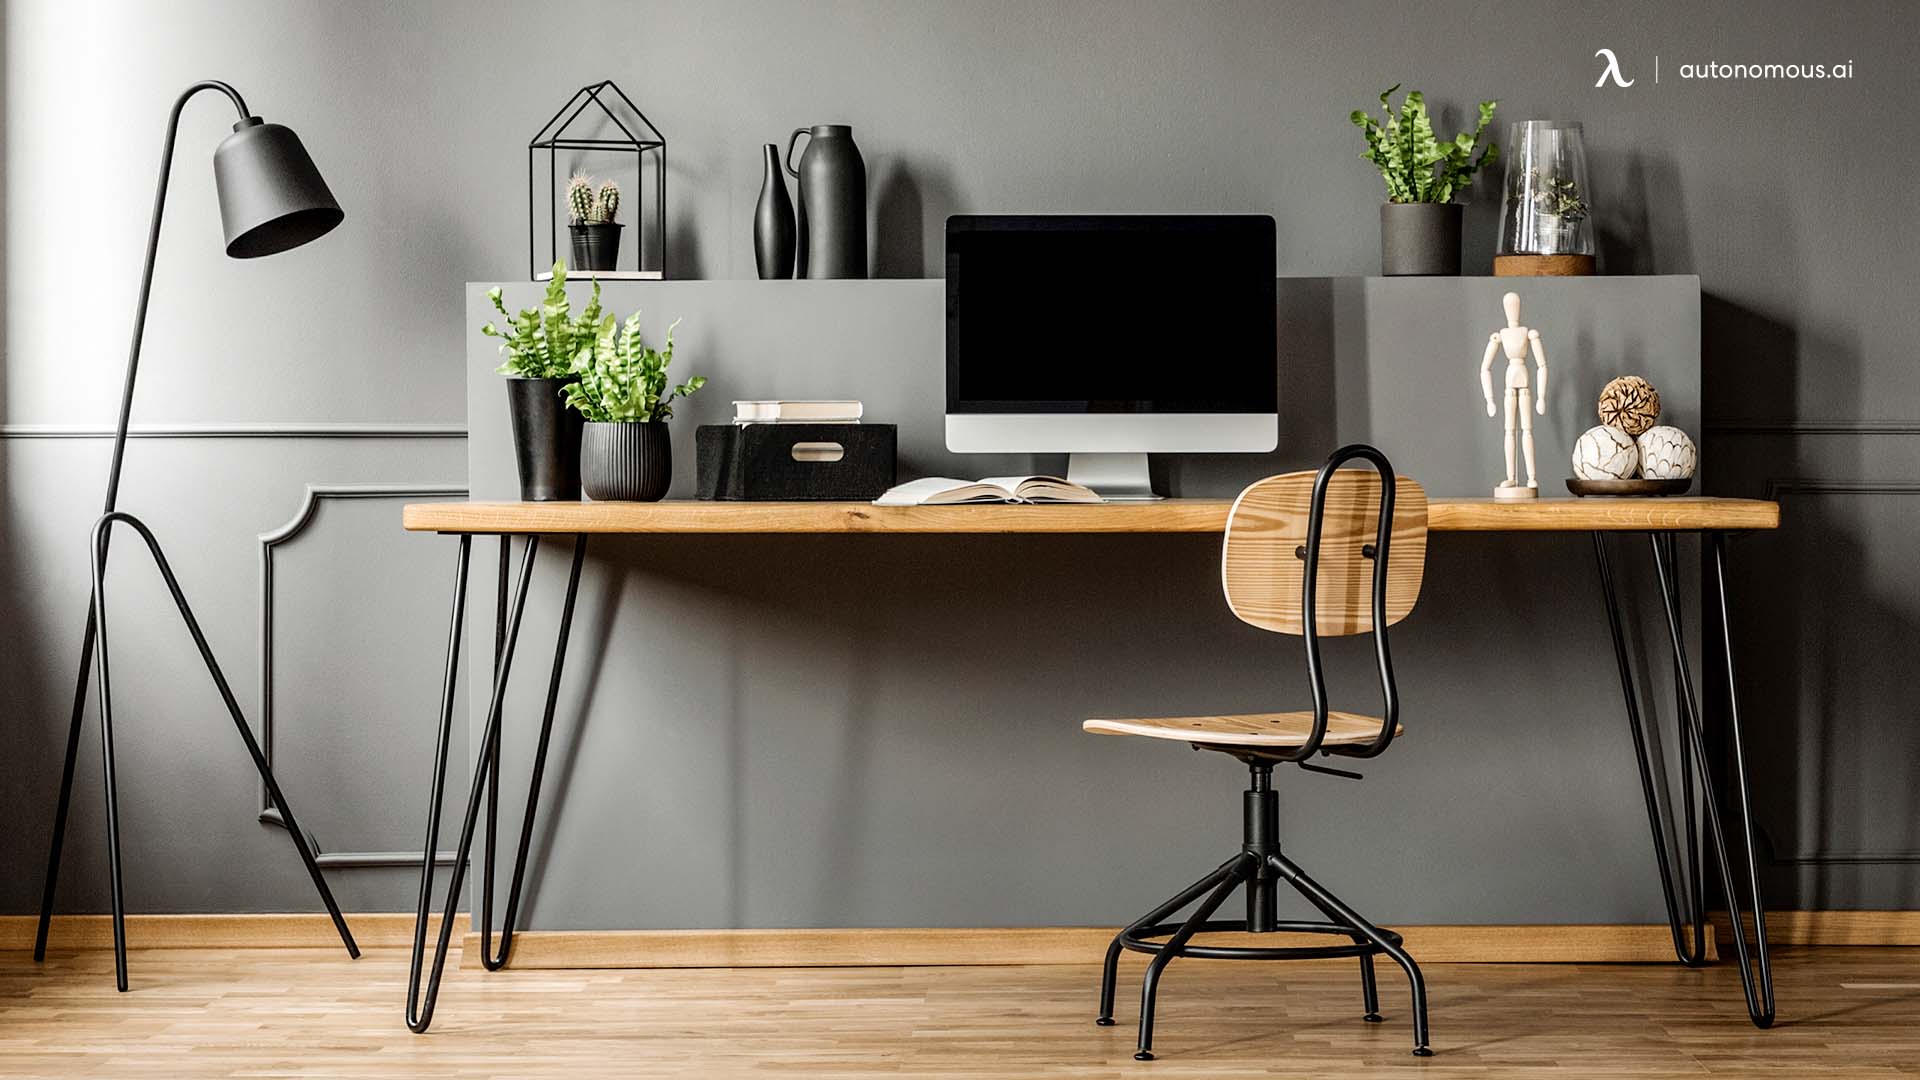 The Complete Masculine Office Inspiration Guide for Your Office Decor